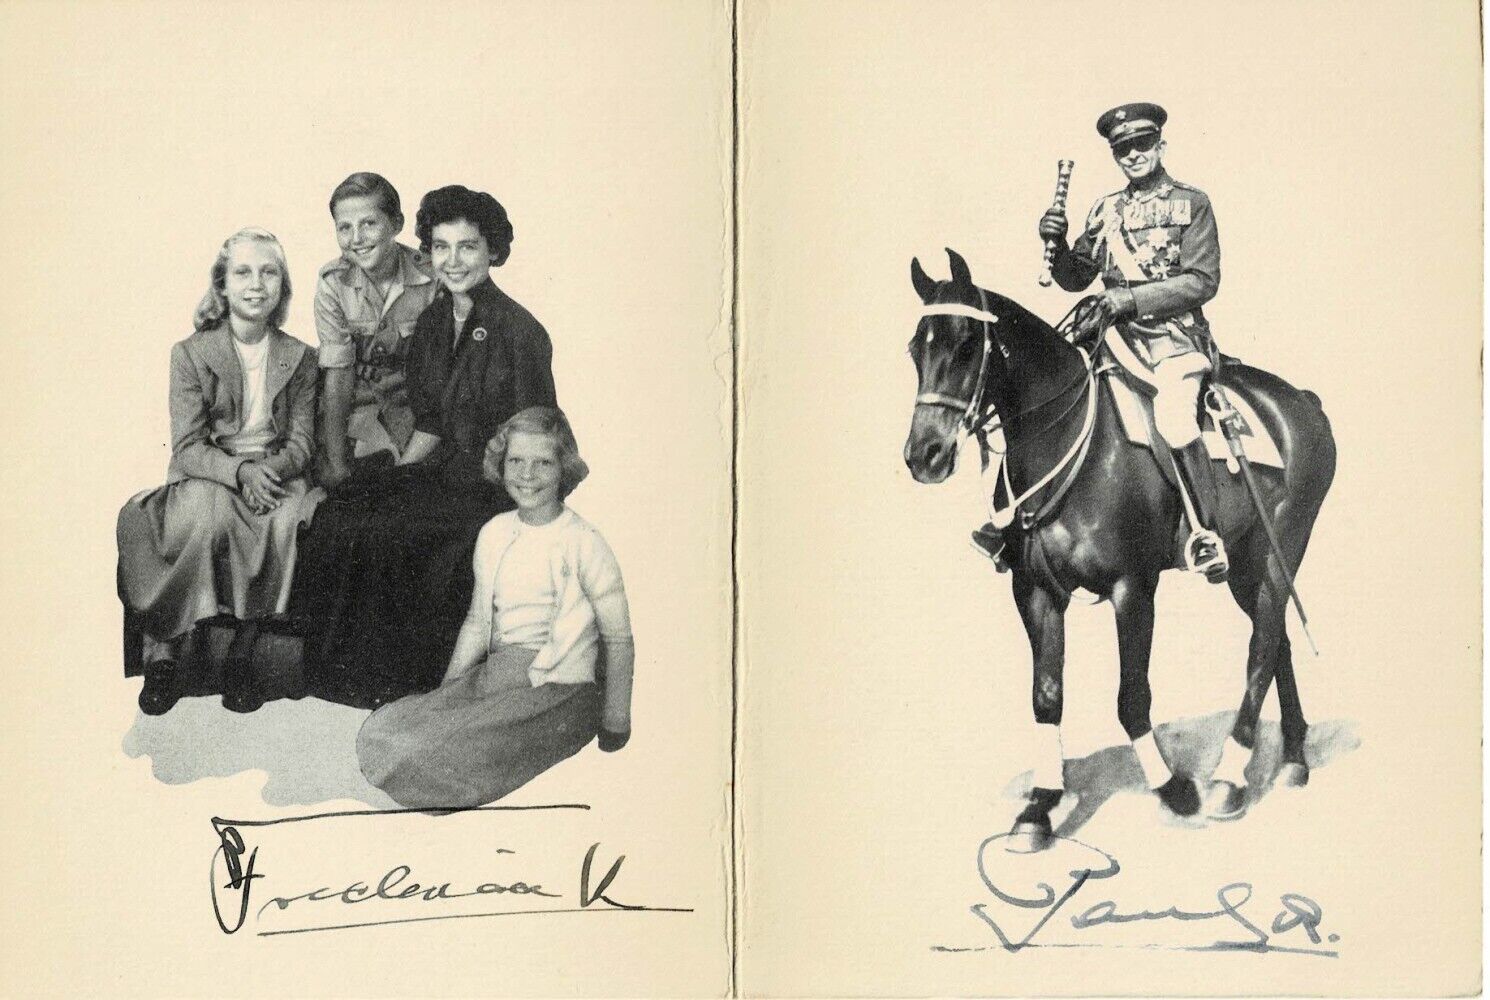 1950s CHRISTMAS CARD w/ PHOTOS SIGNED by KING PAUL of GREECE & FREDERICA HANOVER